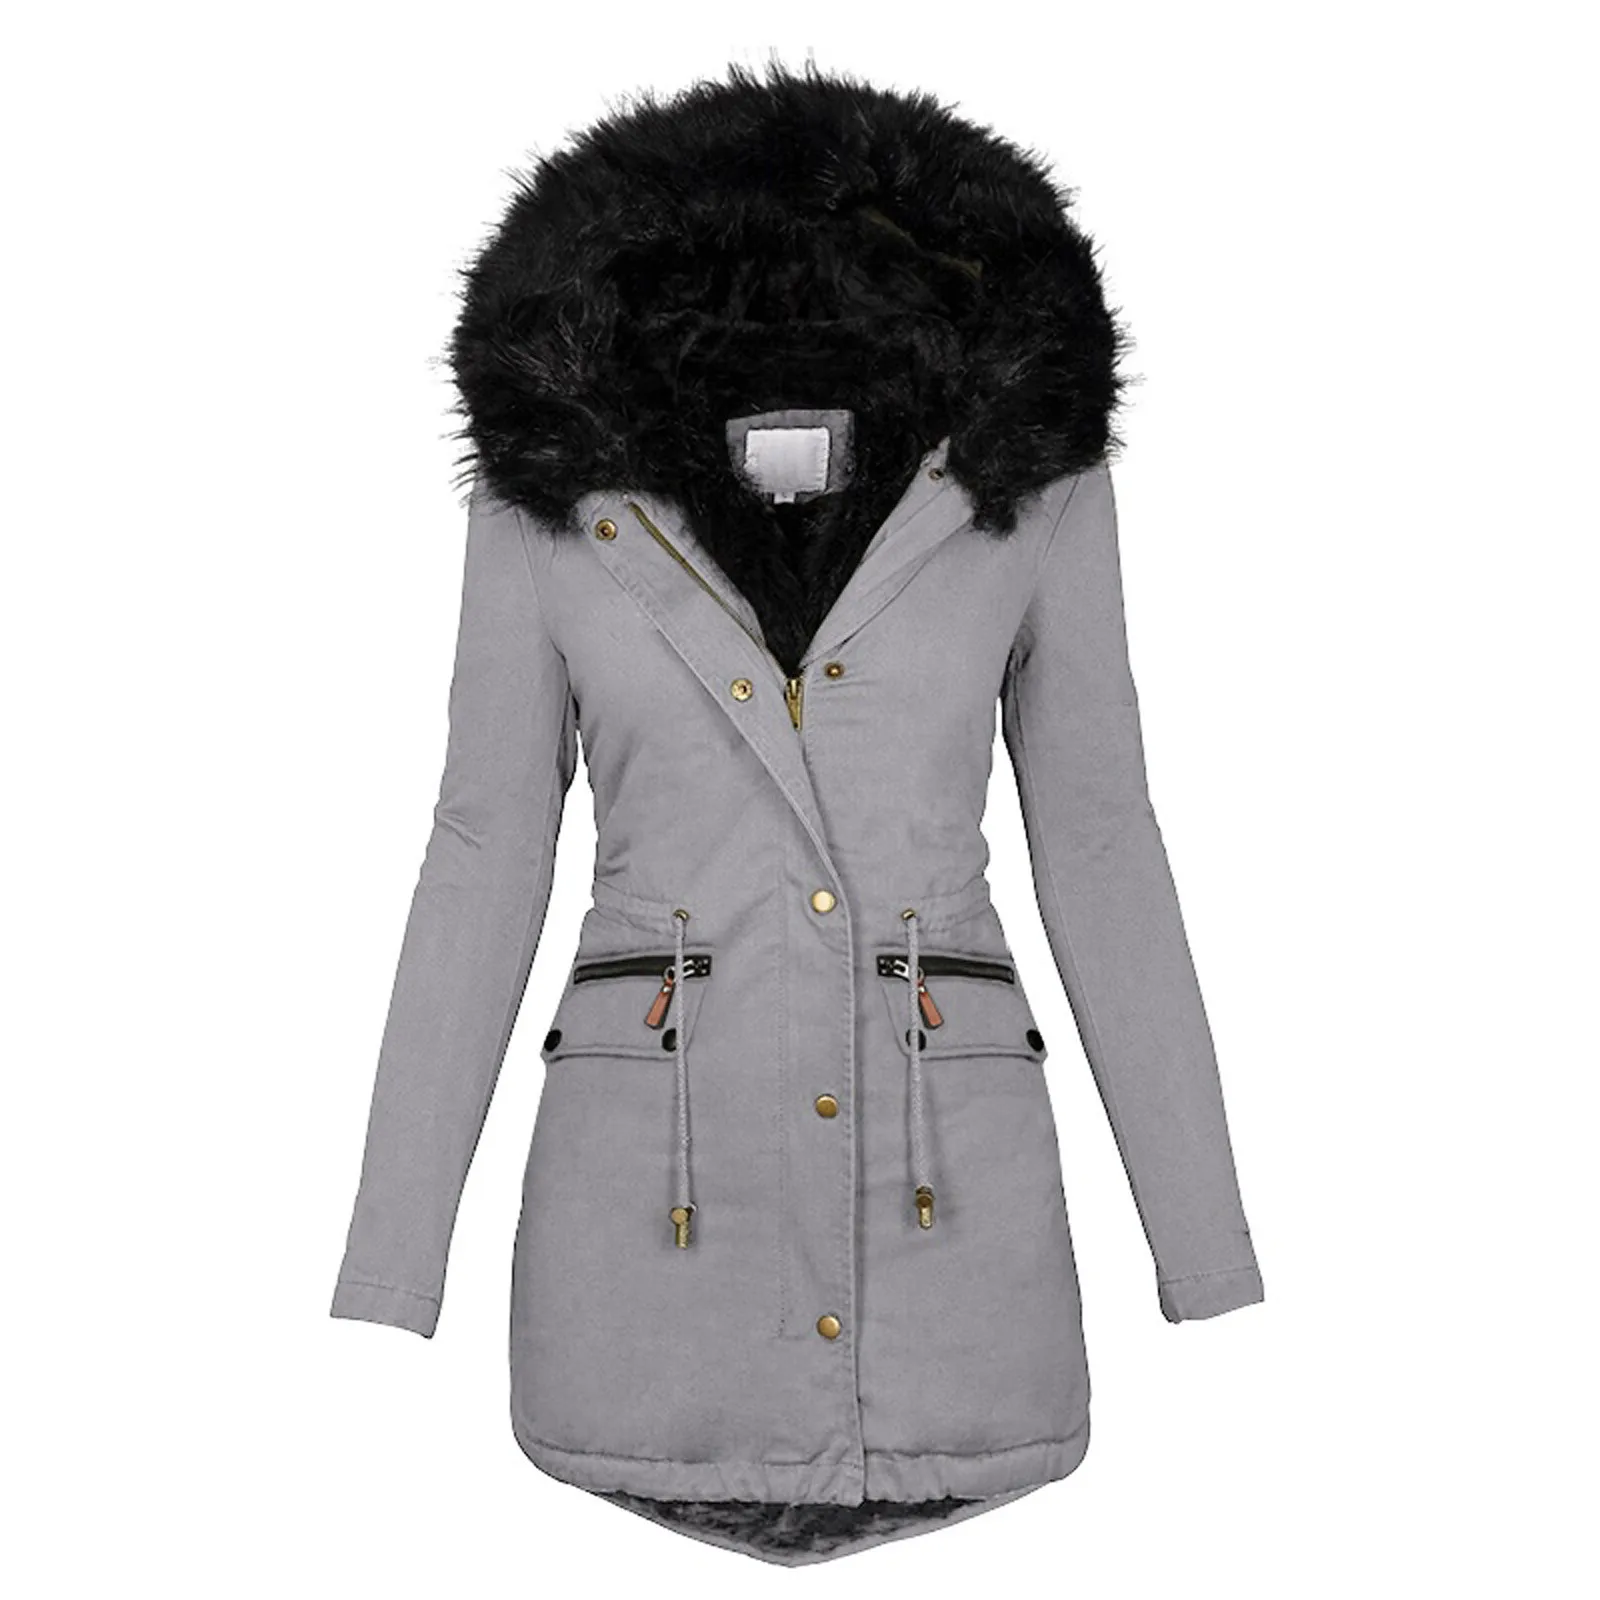 Parka Cotton Long Coat Womens Winter Fleece Thicken Faux Fur Collar Padded Zip Up Parkas Fitness Warm Thermal Overcoat Jackets